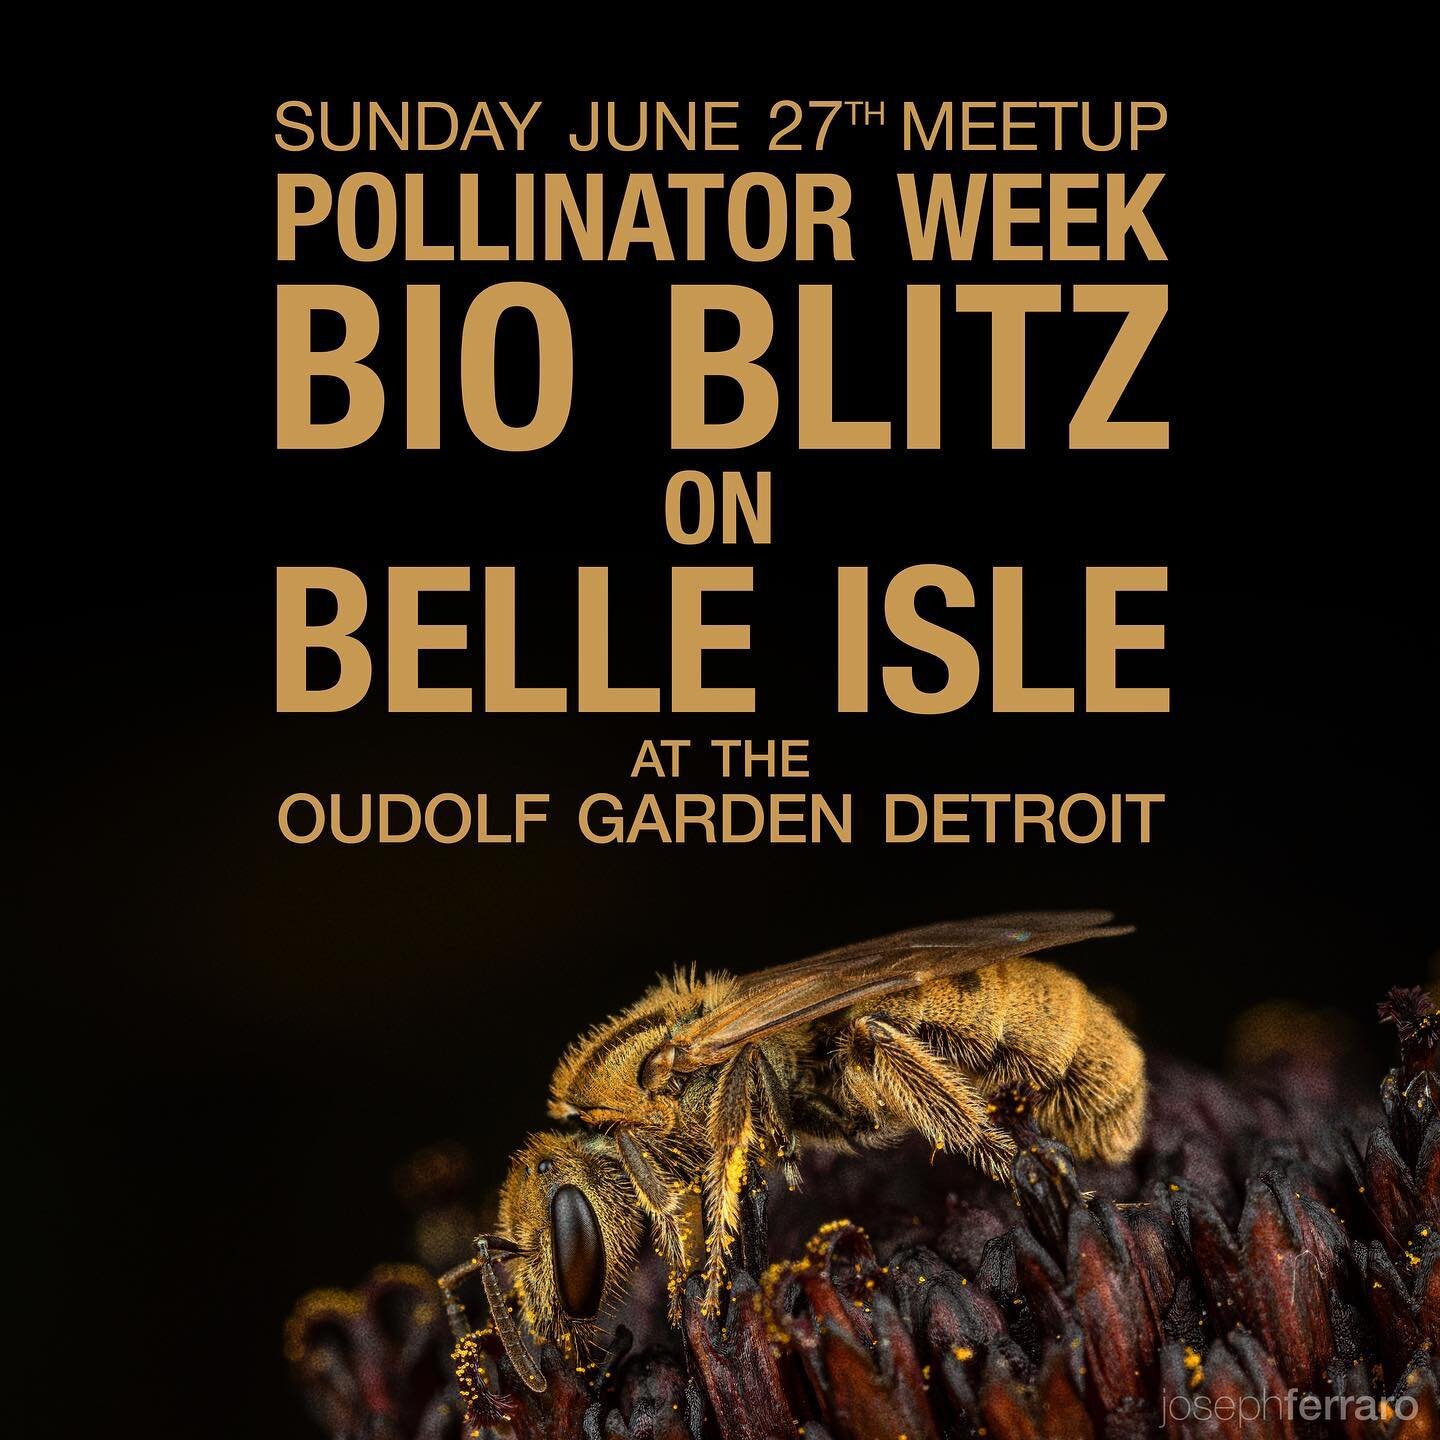 We&rsquo;ll be celebrating Pollinator Week at the Oudolf Garden in Detroit Sunday from 11-1. Come join us for pollinator walks in the garden and to participate in the final day of the Pollinator Week Bioblitz. See link in bio to join this @inaturalis